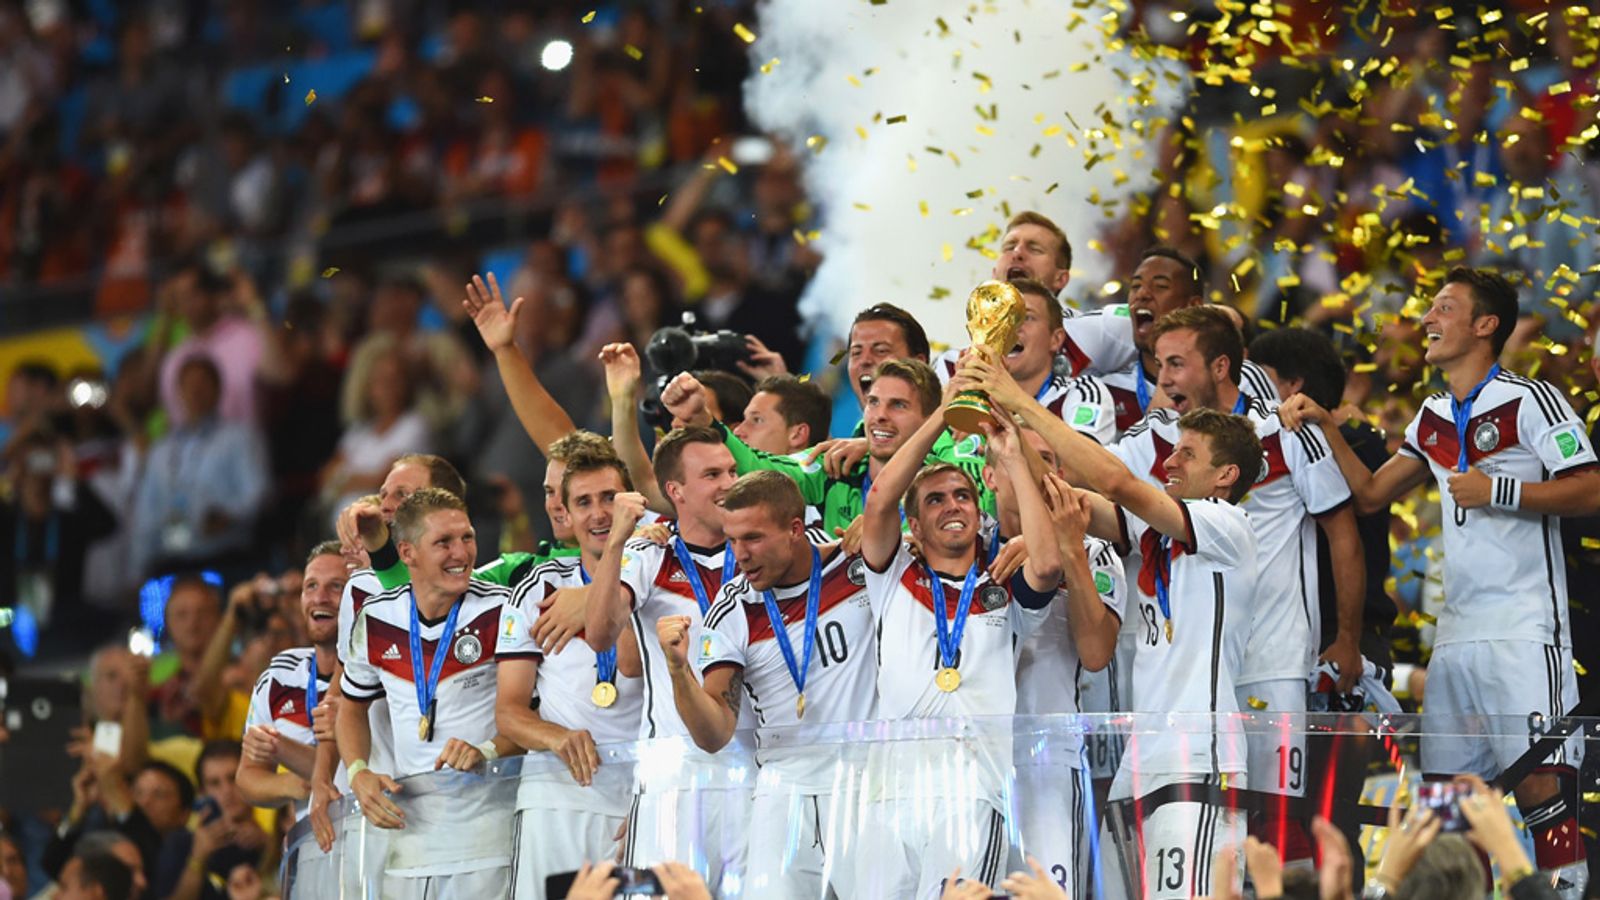 When Mario Götze and Germany won the 2014 FIFA World Cup